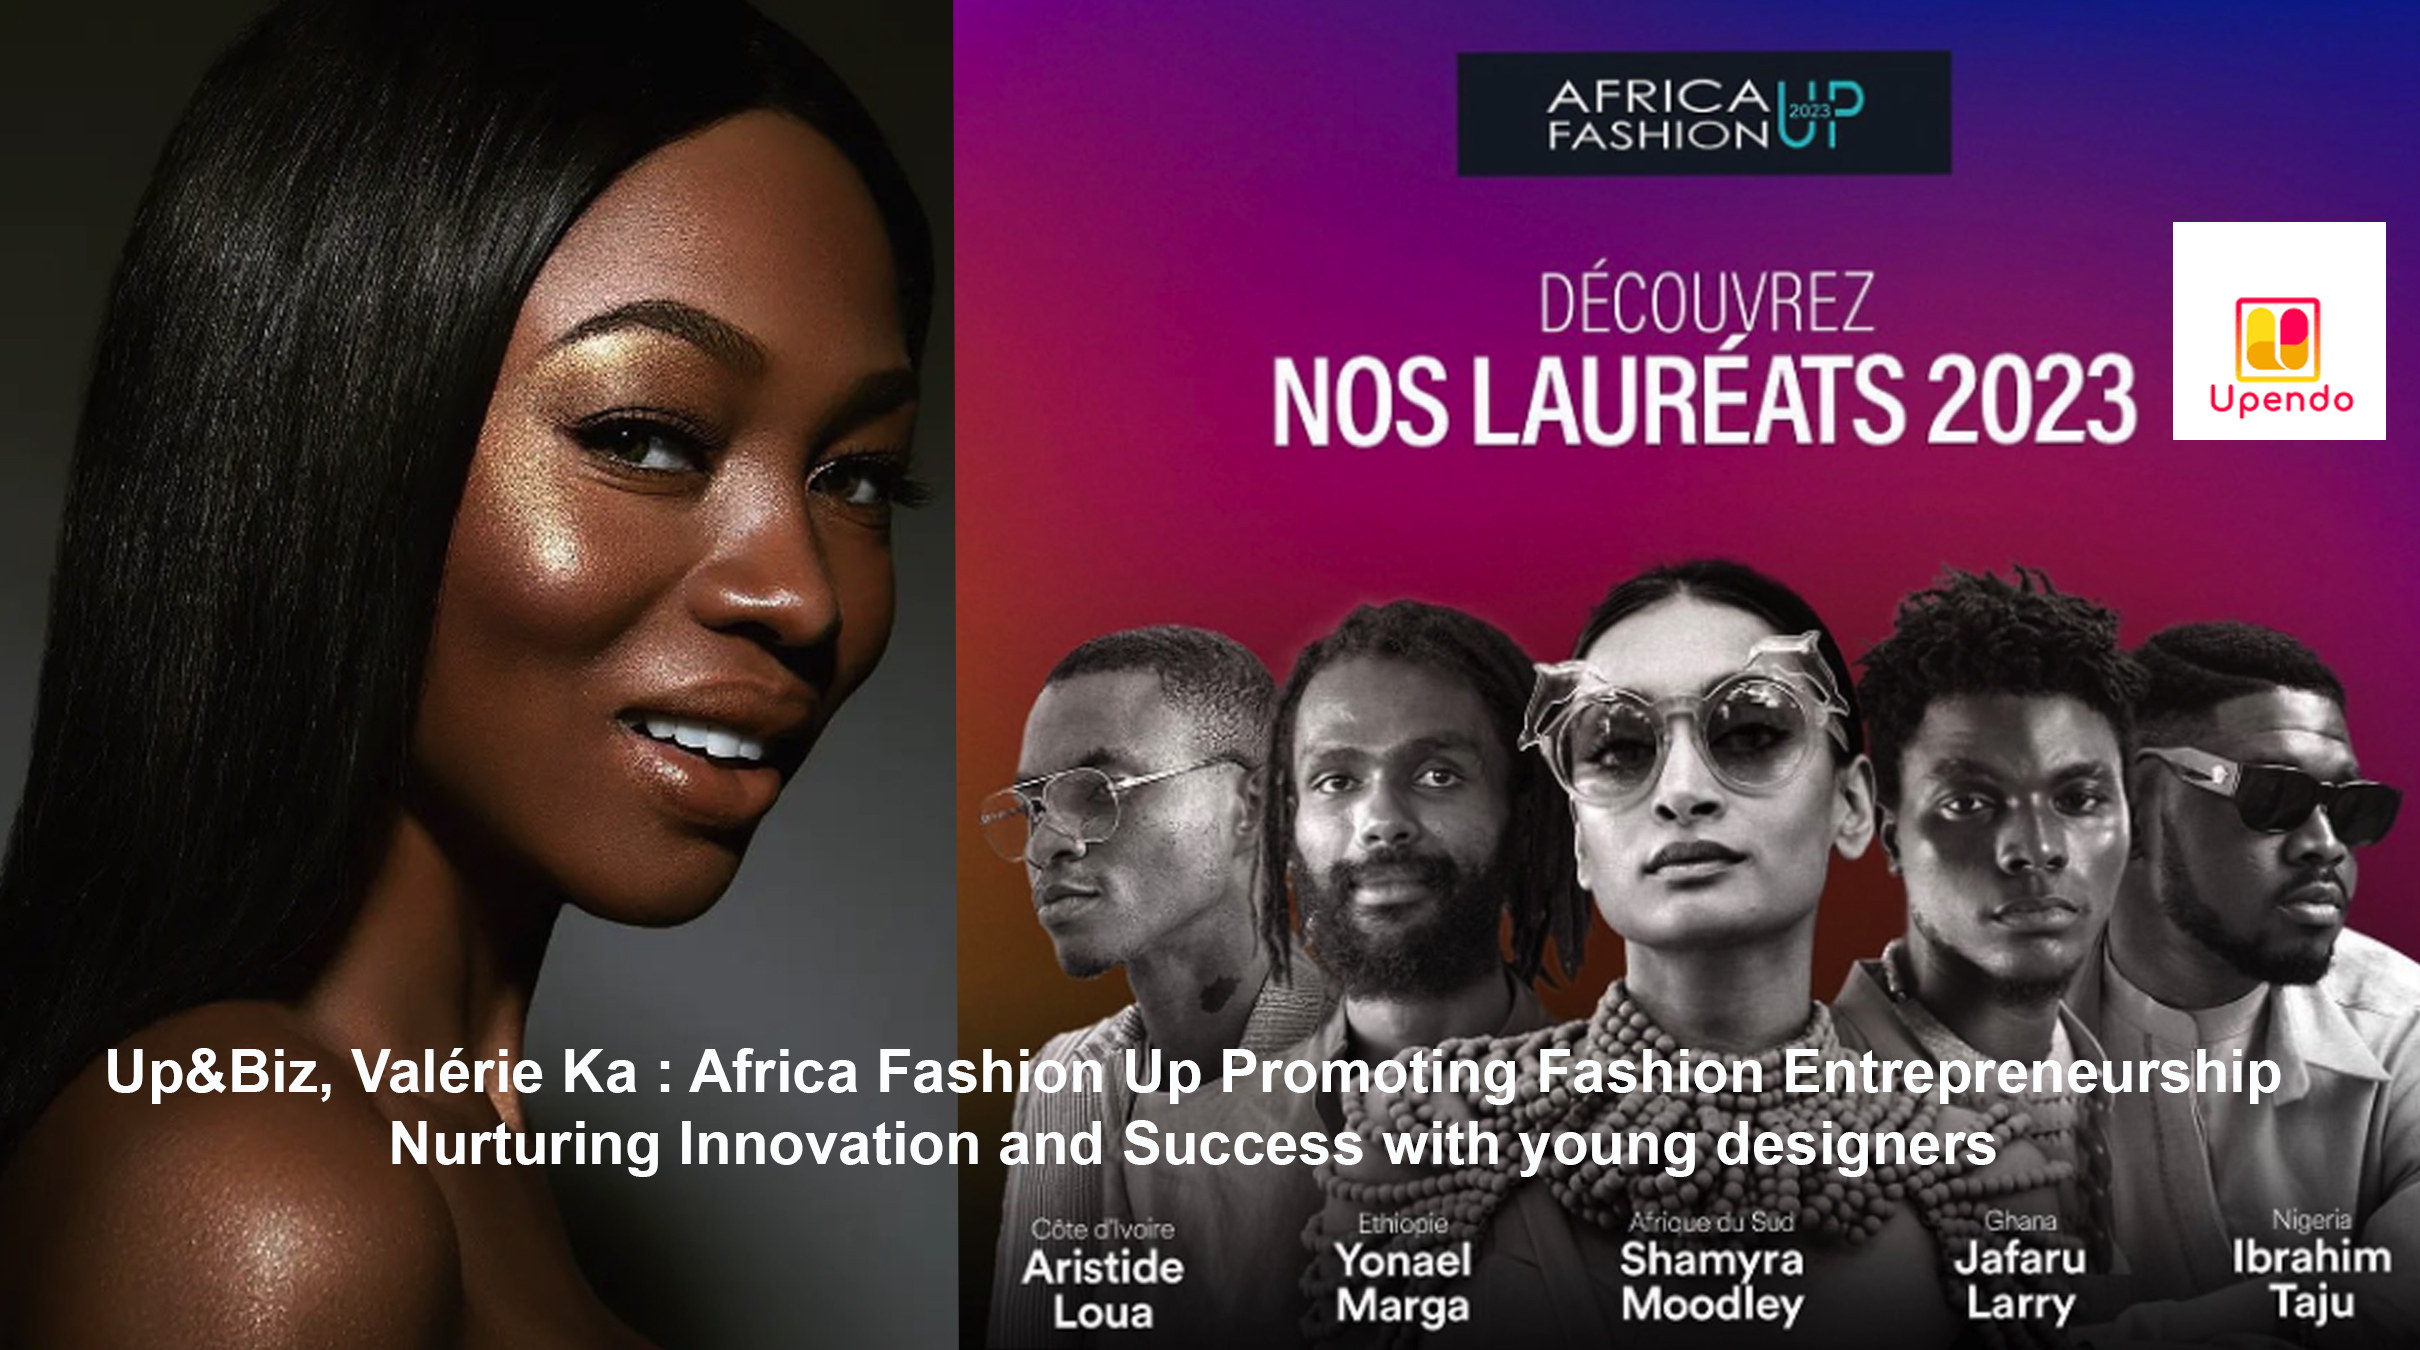 AFRICA-VOGUE-COVER-Up&Biz-Valérie-Ka-Africa-Fashion-Up-Promoting-Fashion-Entrepreneurship-Nurturing-Innovation-and-Success-with-young-designers-DN-AFRICA-DN-A-INTERNATIONAL-Media-Partenaire